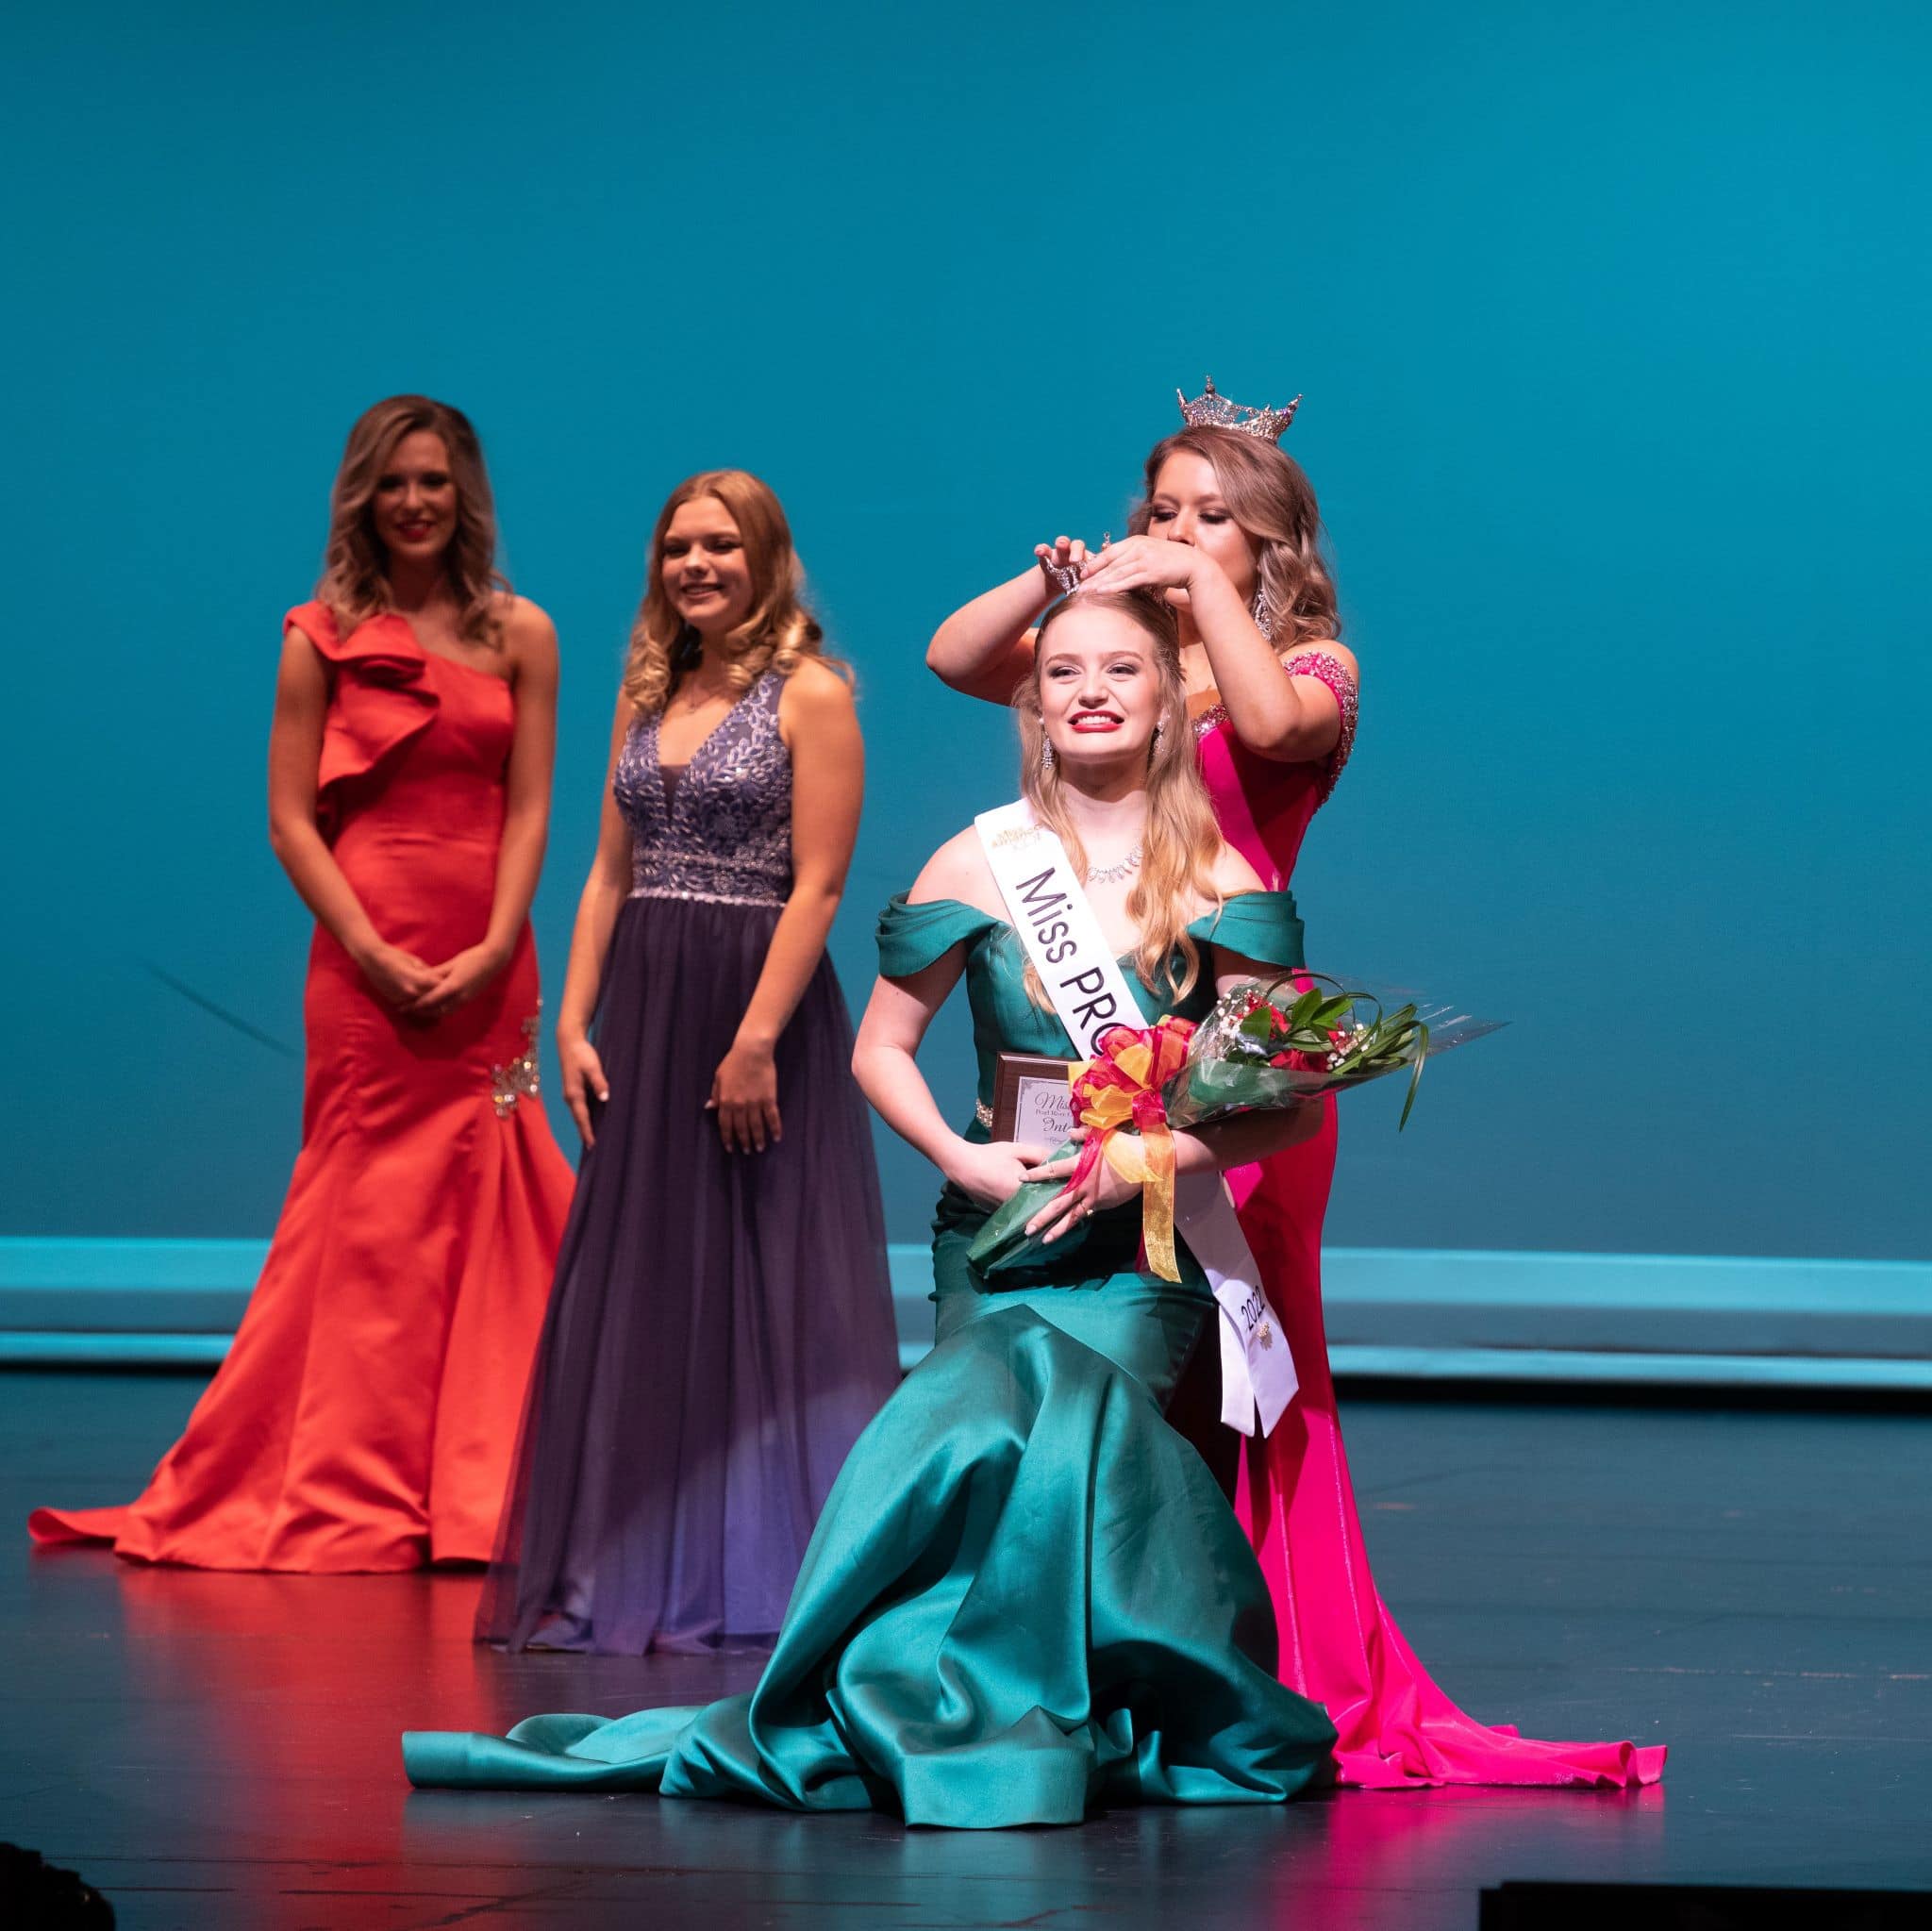 Hannah Smith crowned Miss PRCC 2022 by Miss PRCC 2021 Gabrielle Lewis